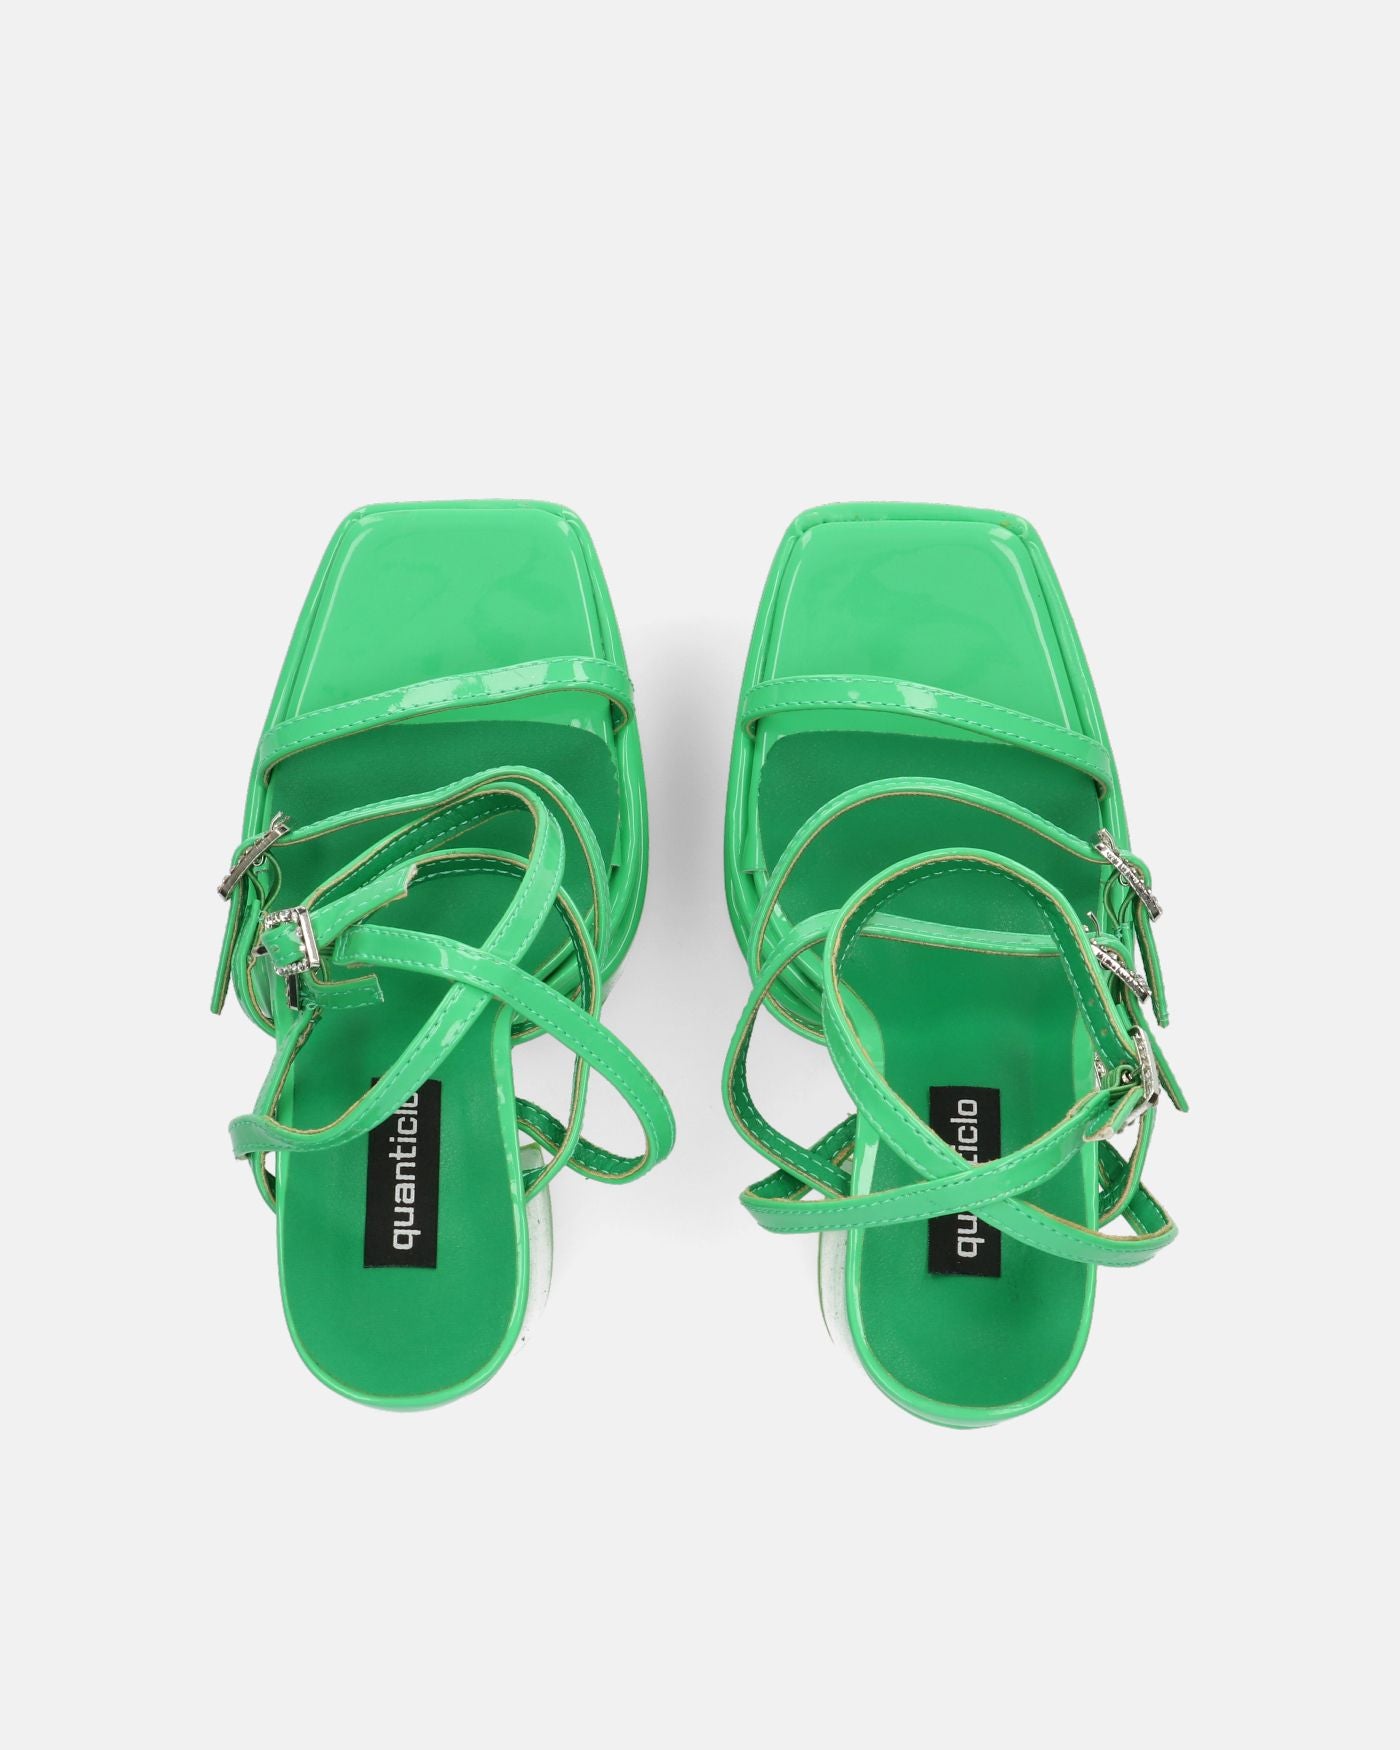 TEXA - sandals with strap and high heel in green